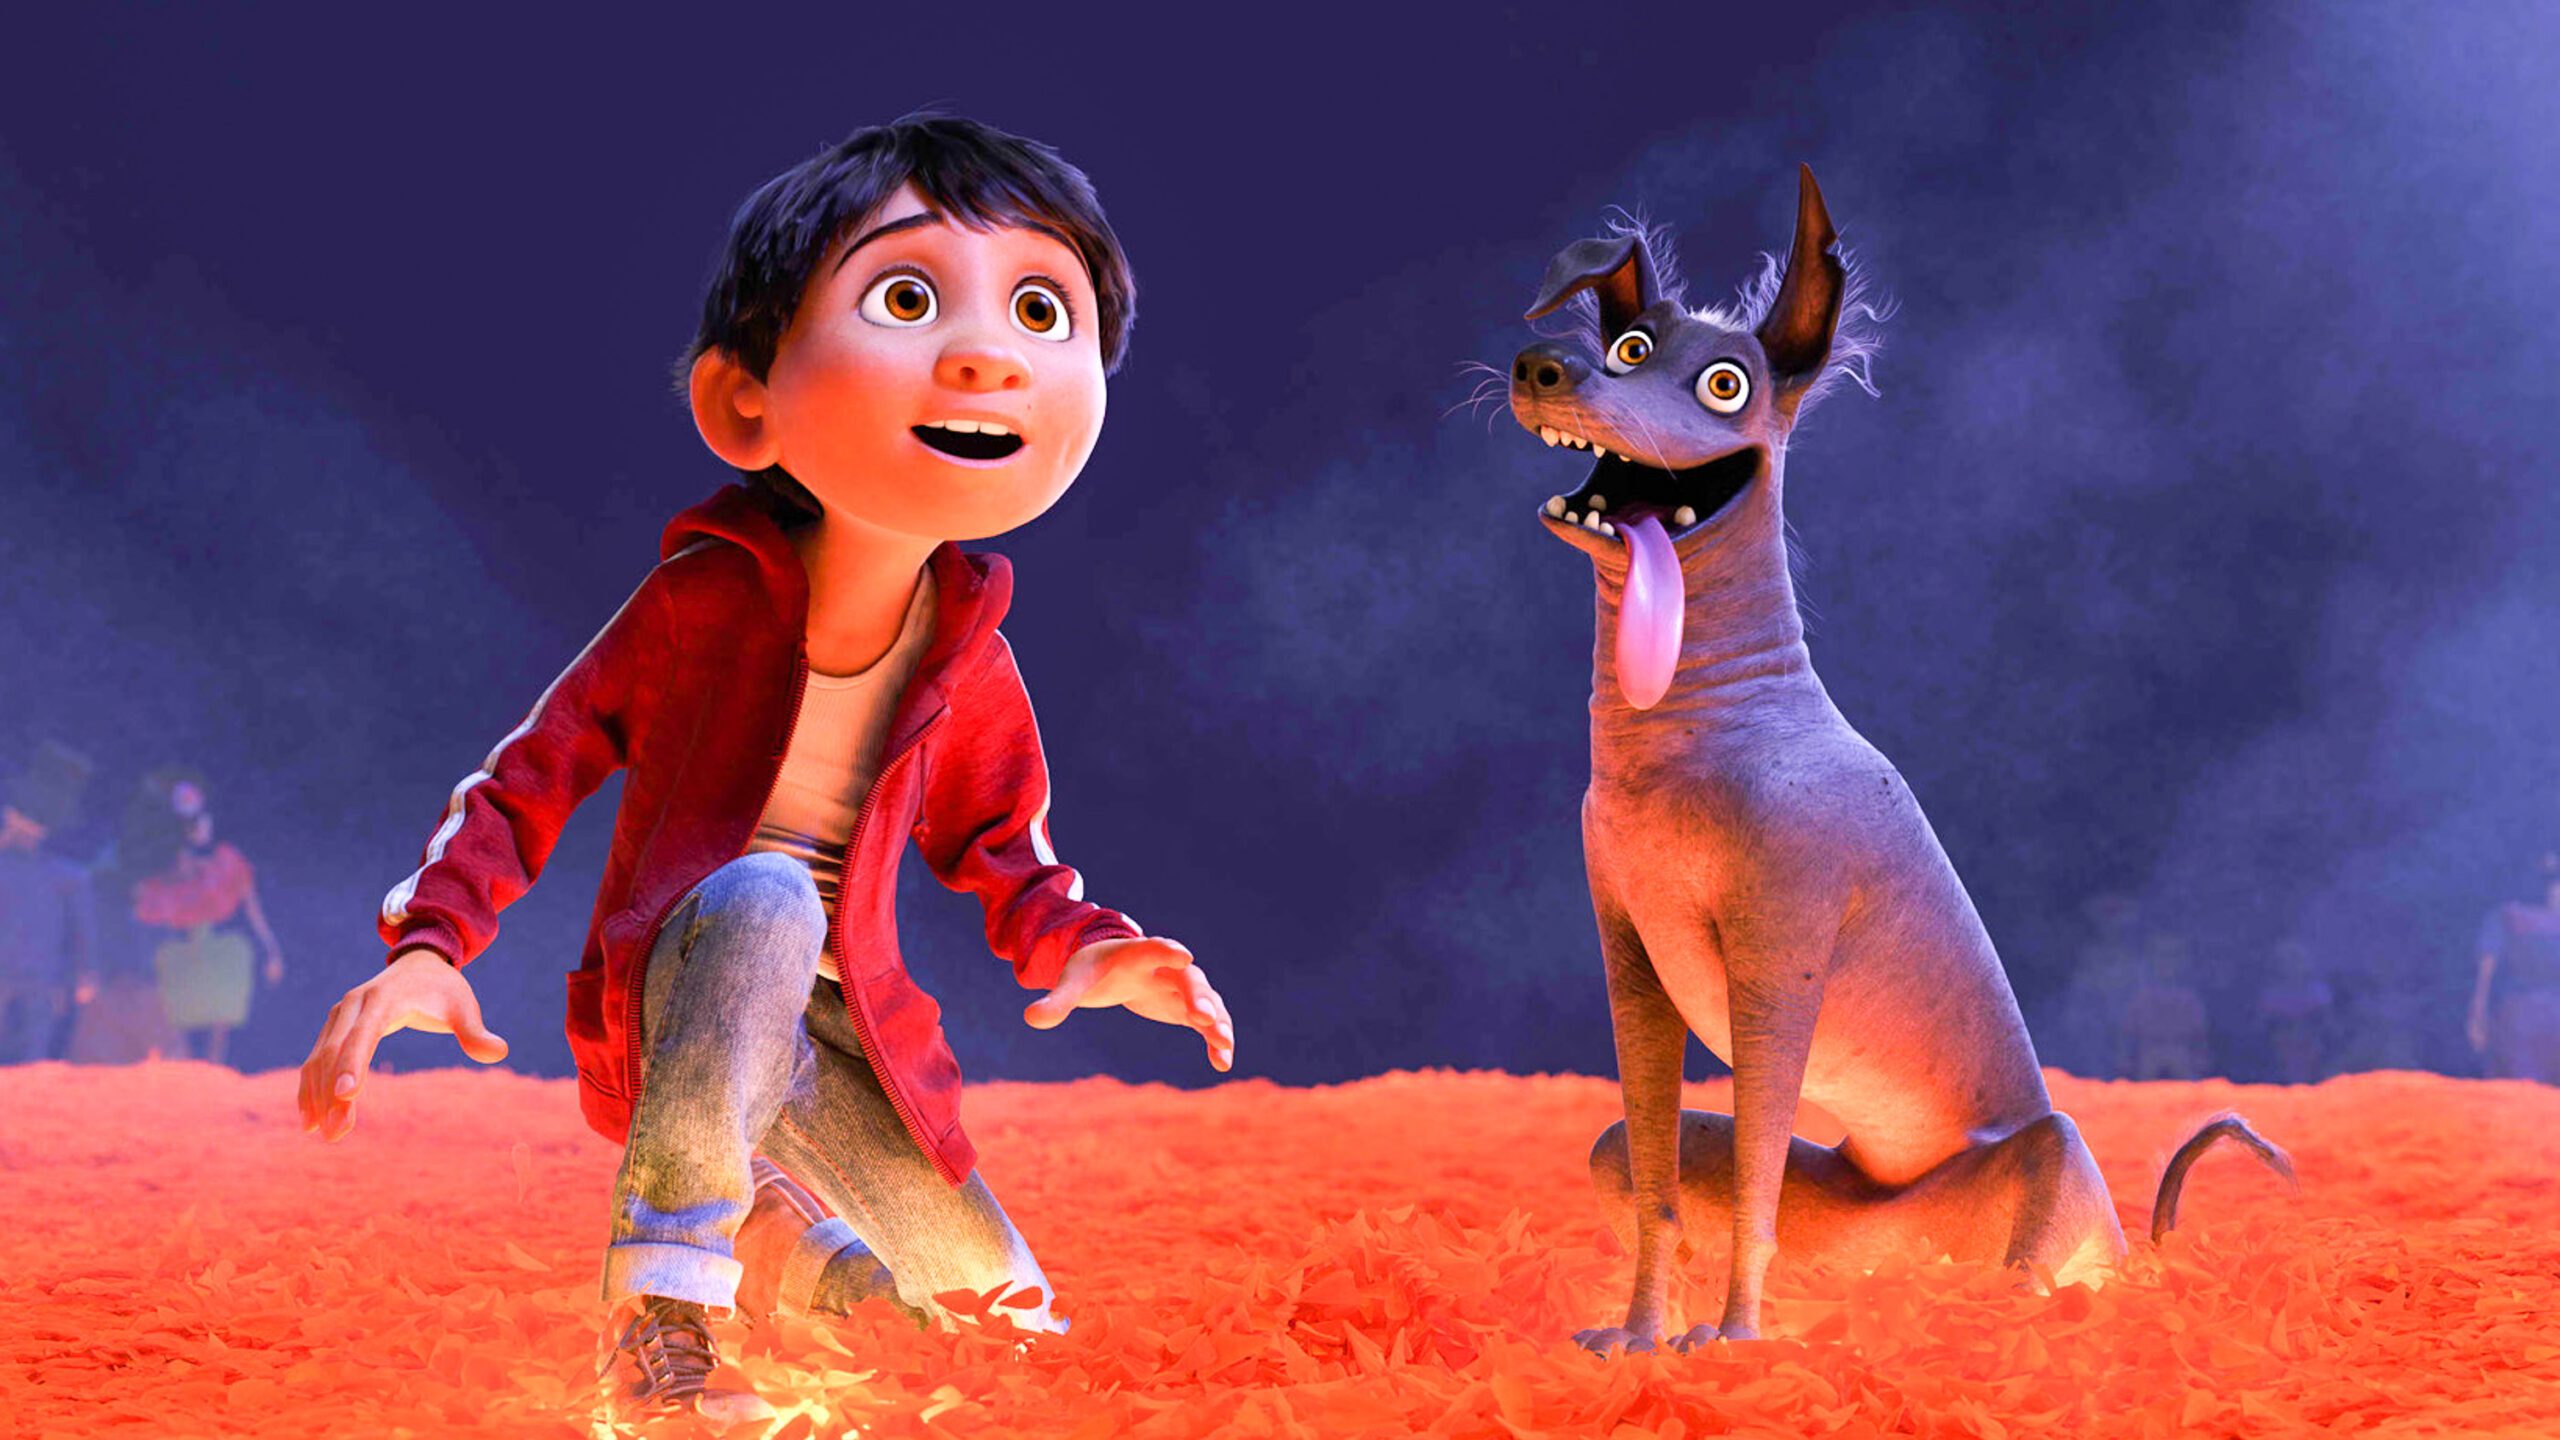 WATCH: Disney releases colorful new trailer for ‘Coco’